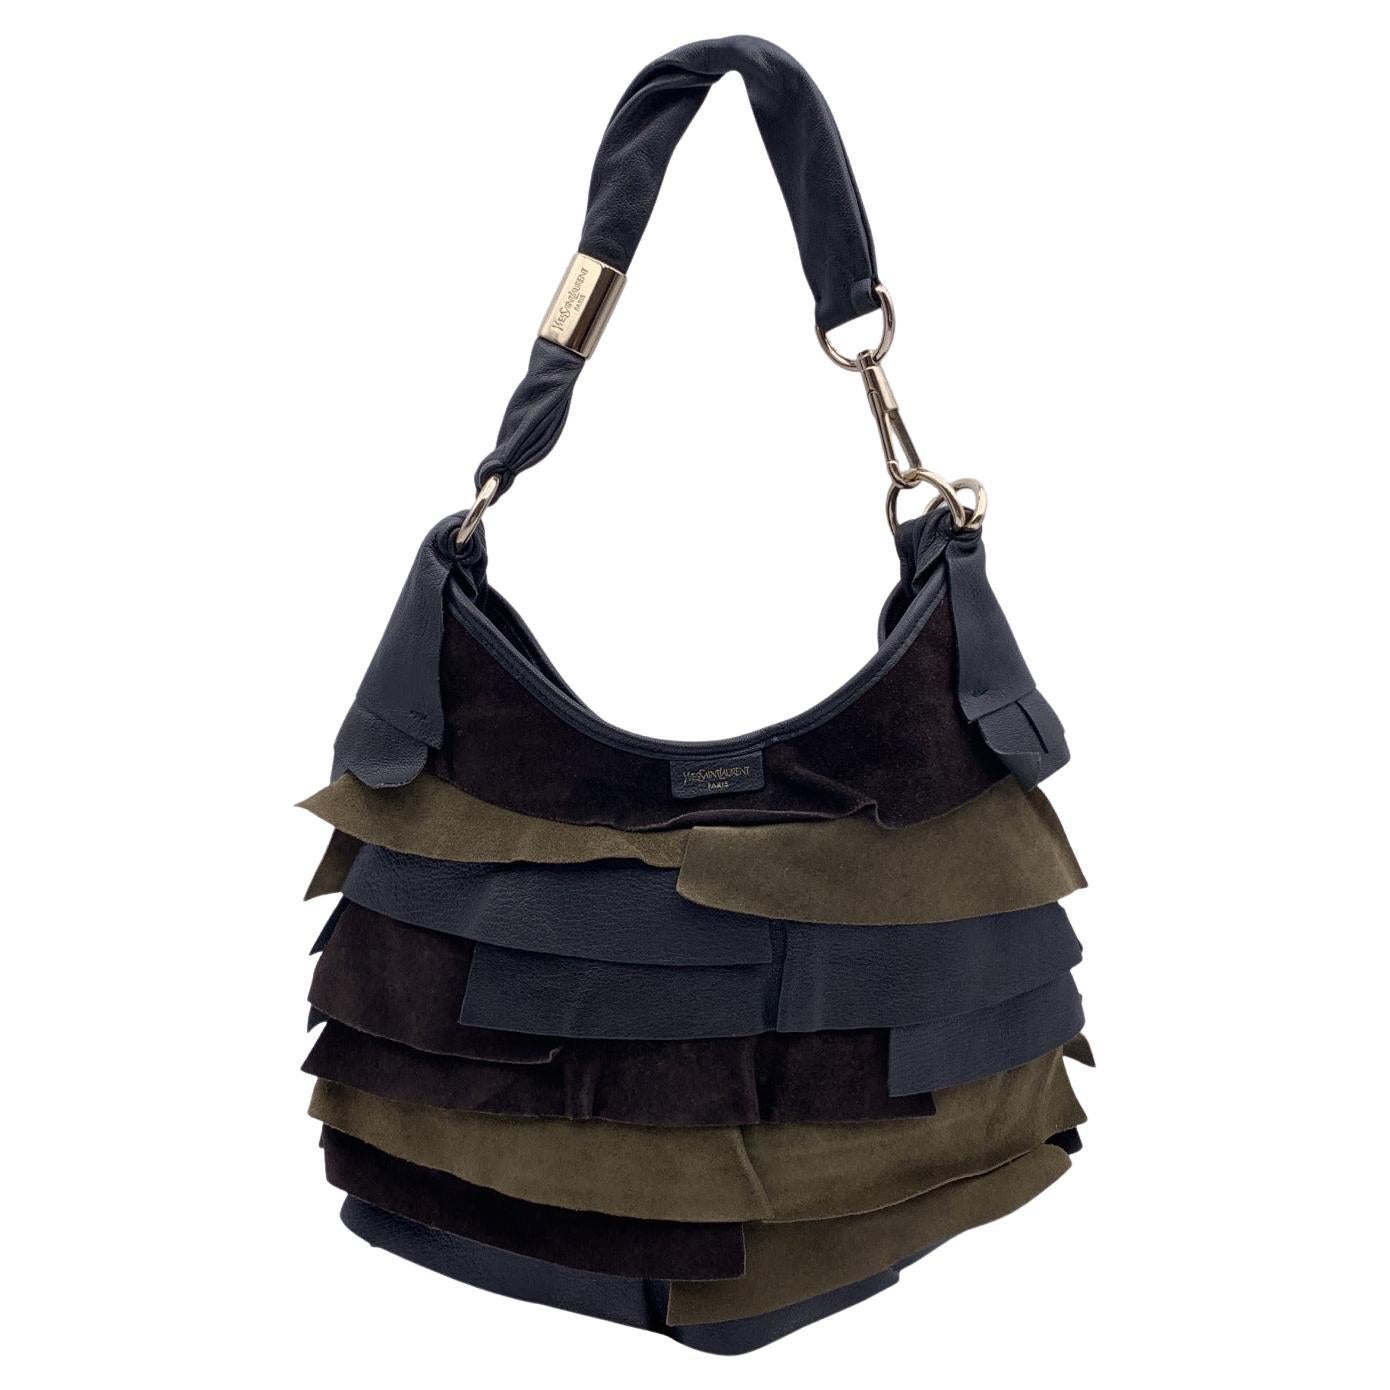 Yves Saint Laurent Tricolor Ruffled Leather Suede St Tropez Hobo Bag